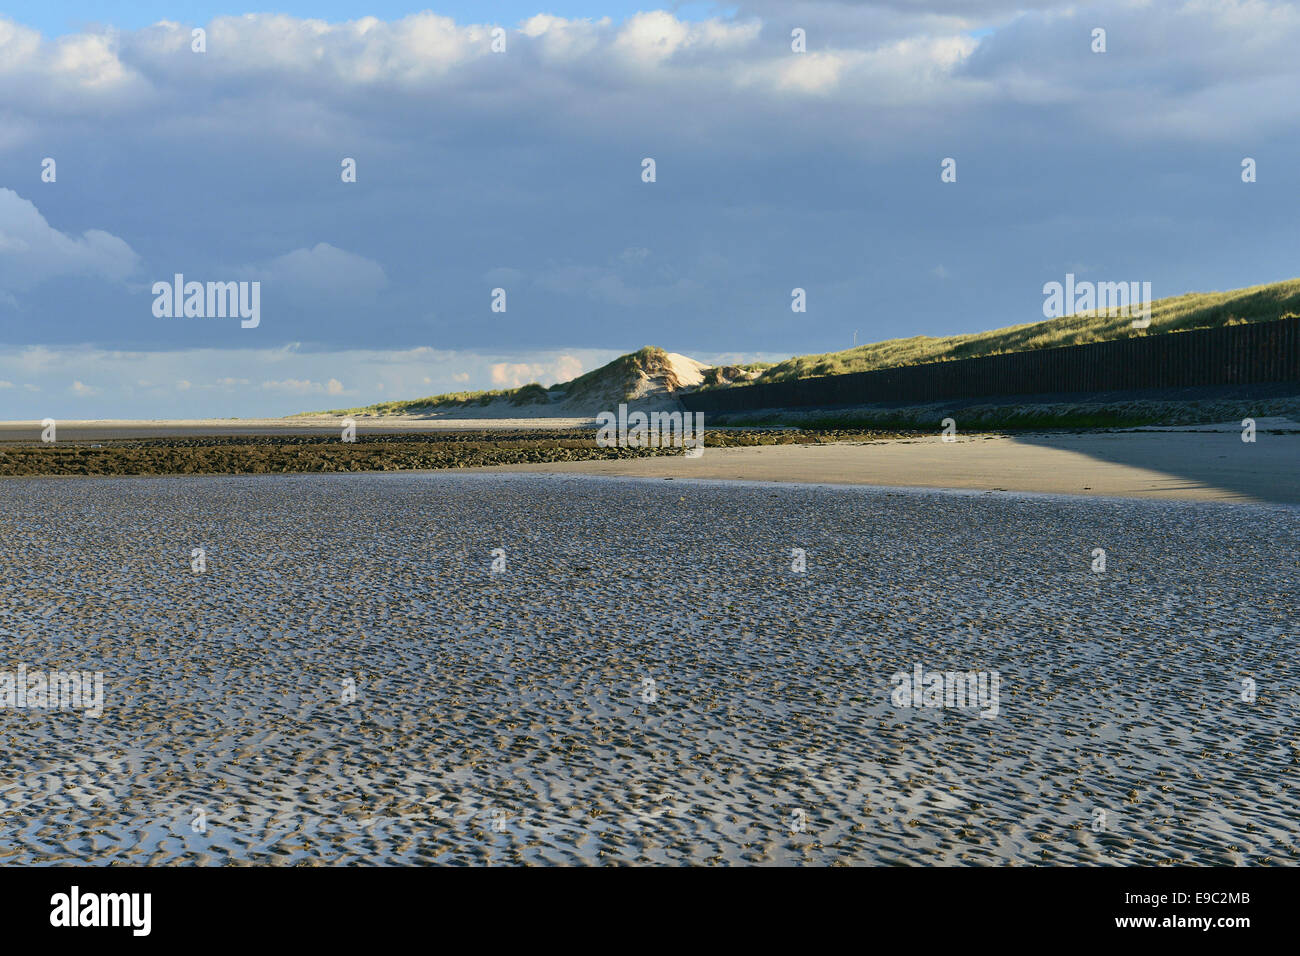 The dunes in the west are protected with a wall of steel, 27 September 2013, Island of Spiekeroog Stock Photo